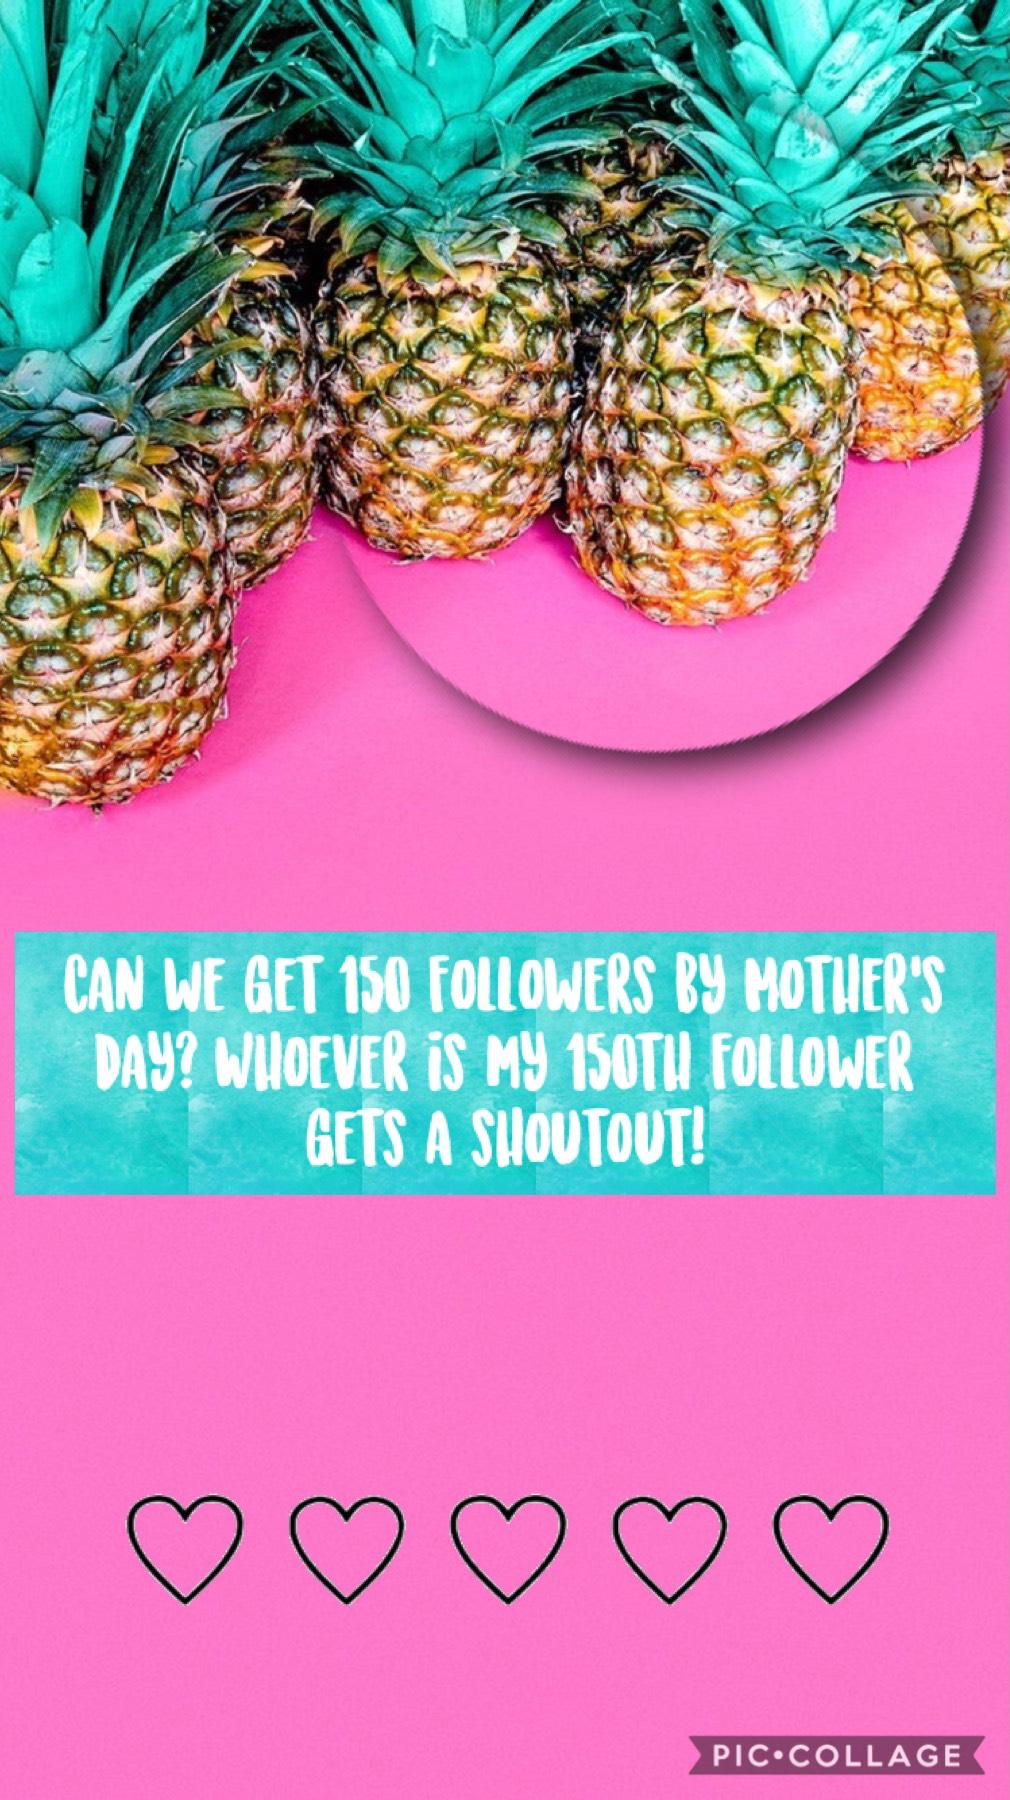 Tap ✌︎
Ok, so can we plz get to 150 followers by Mother’s Day? This would totally make my day if we can get to this goal even sooner!